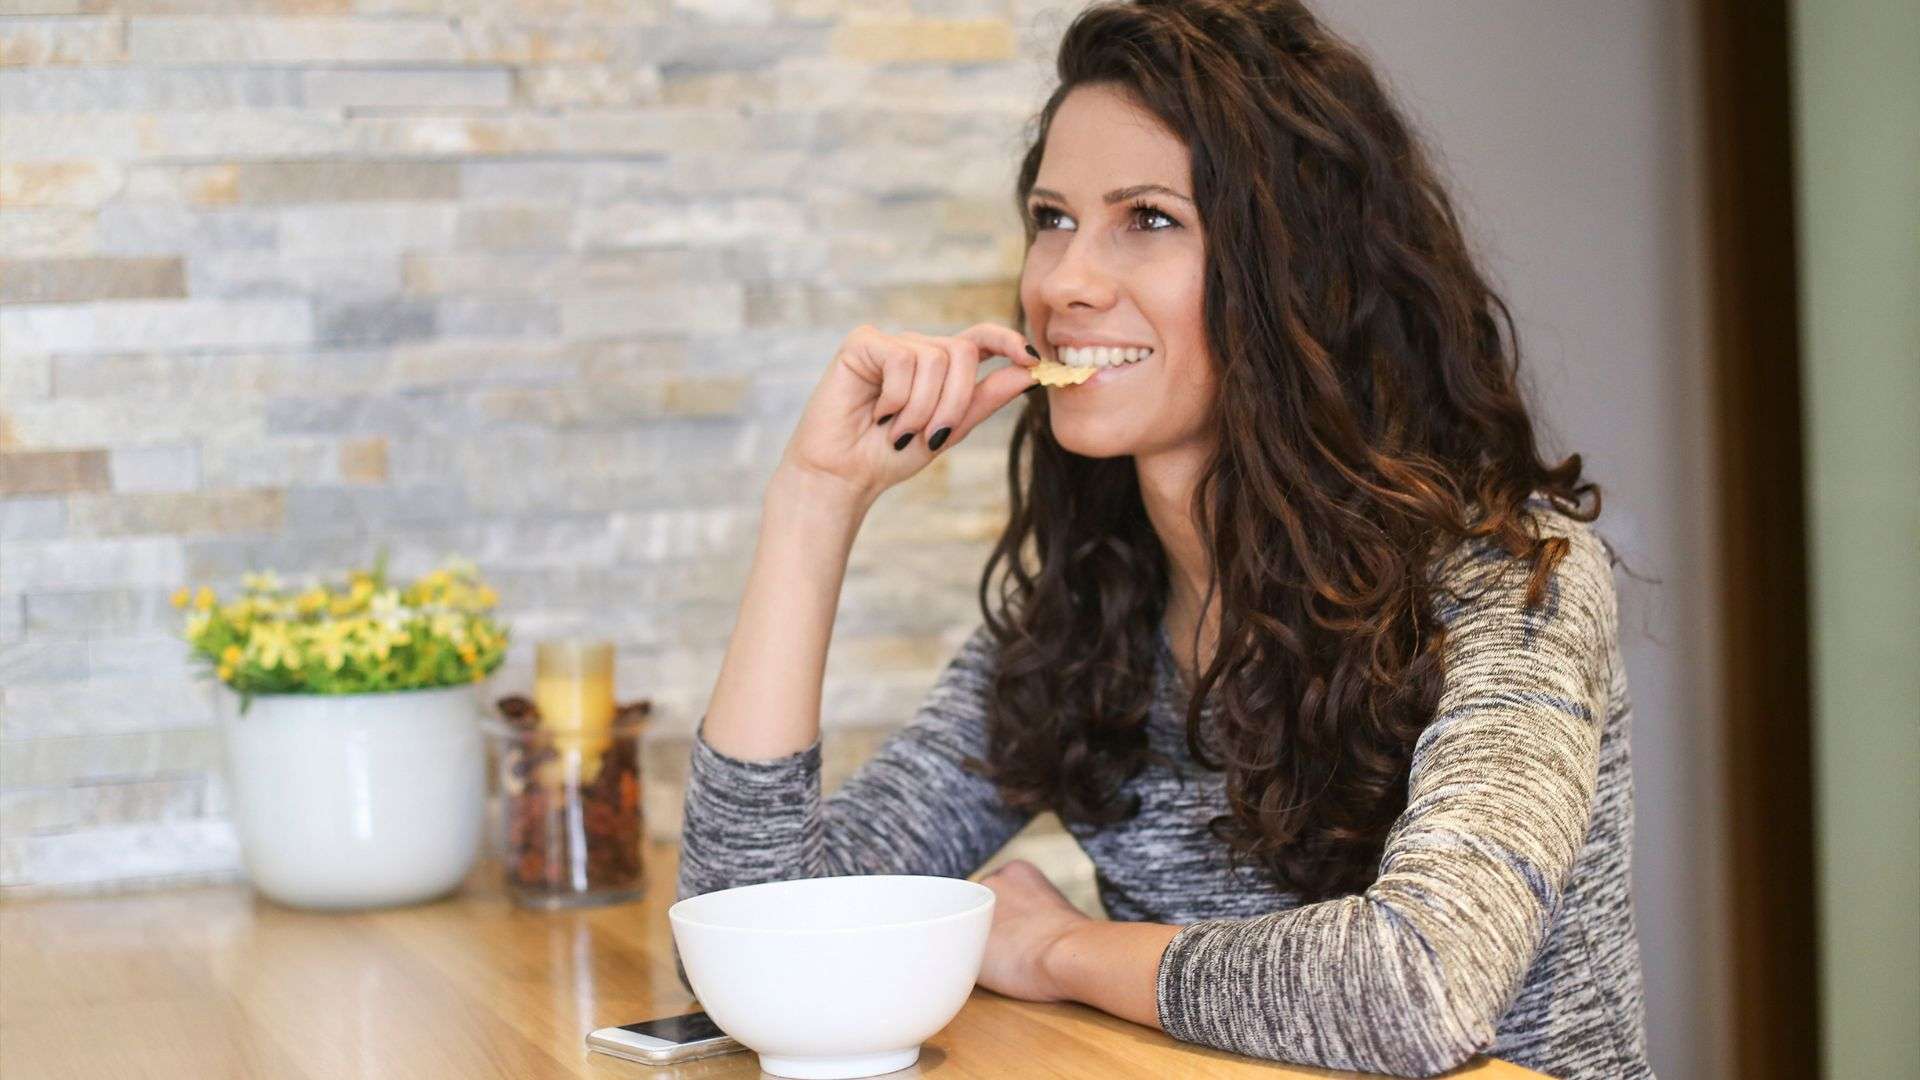 A woman snacking at her desk at work.